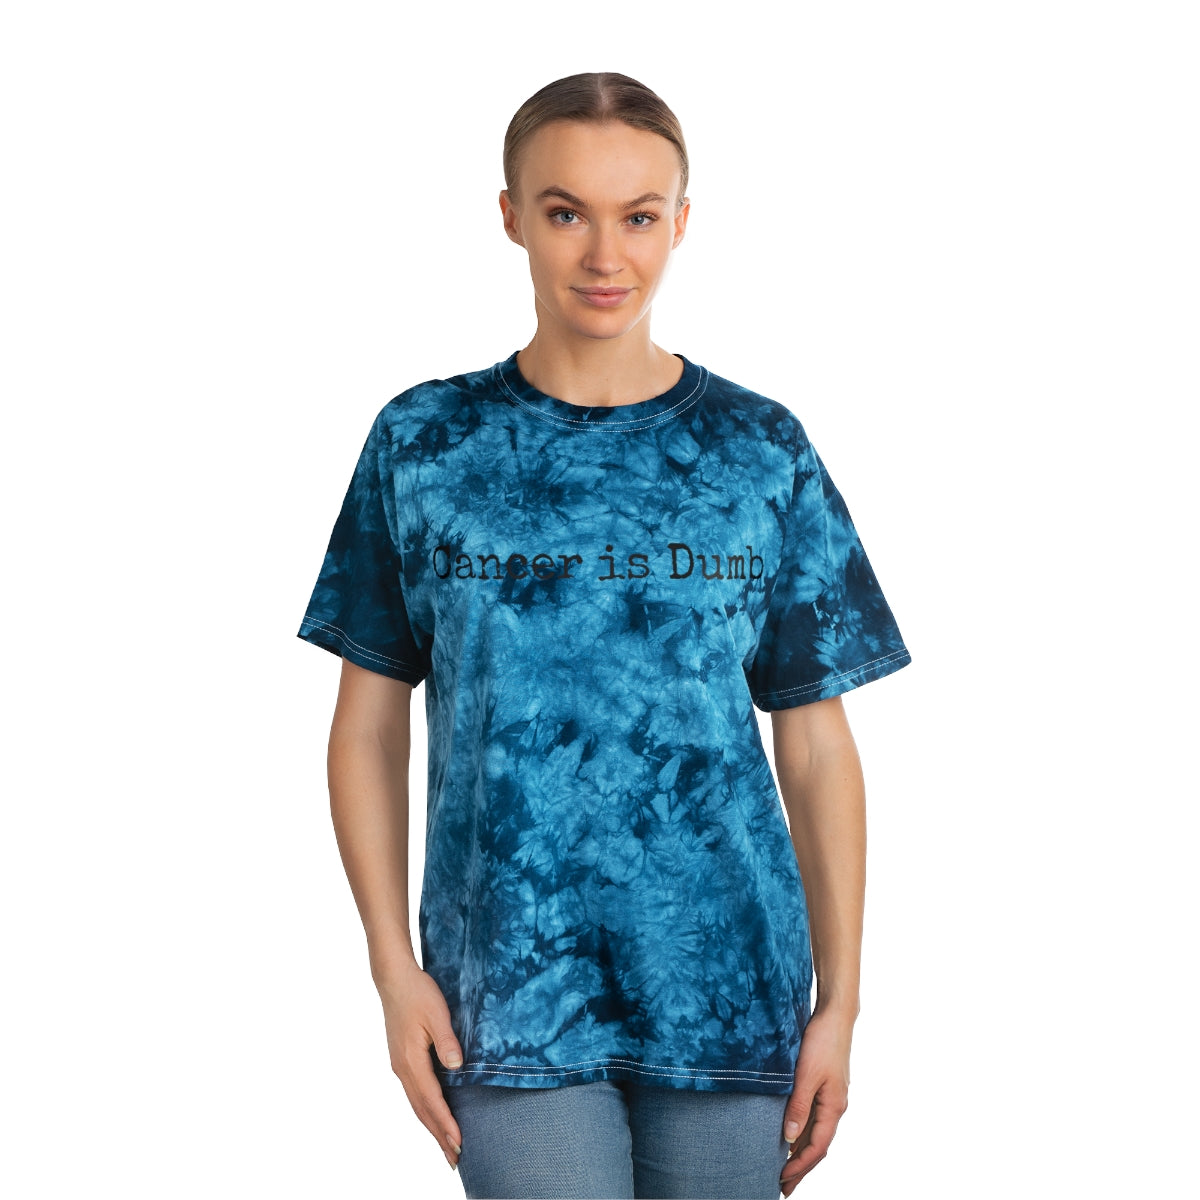 Tie-Dye Tee, Crystal T Shirt Tshirt Anti Cancer Cancer is Dumb Survivor Support Humorous Funny